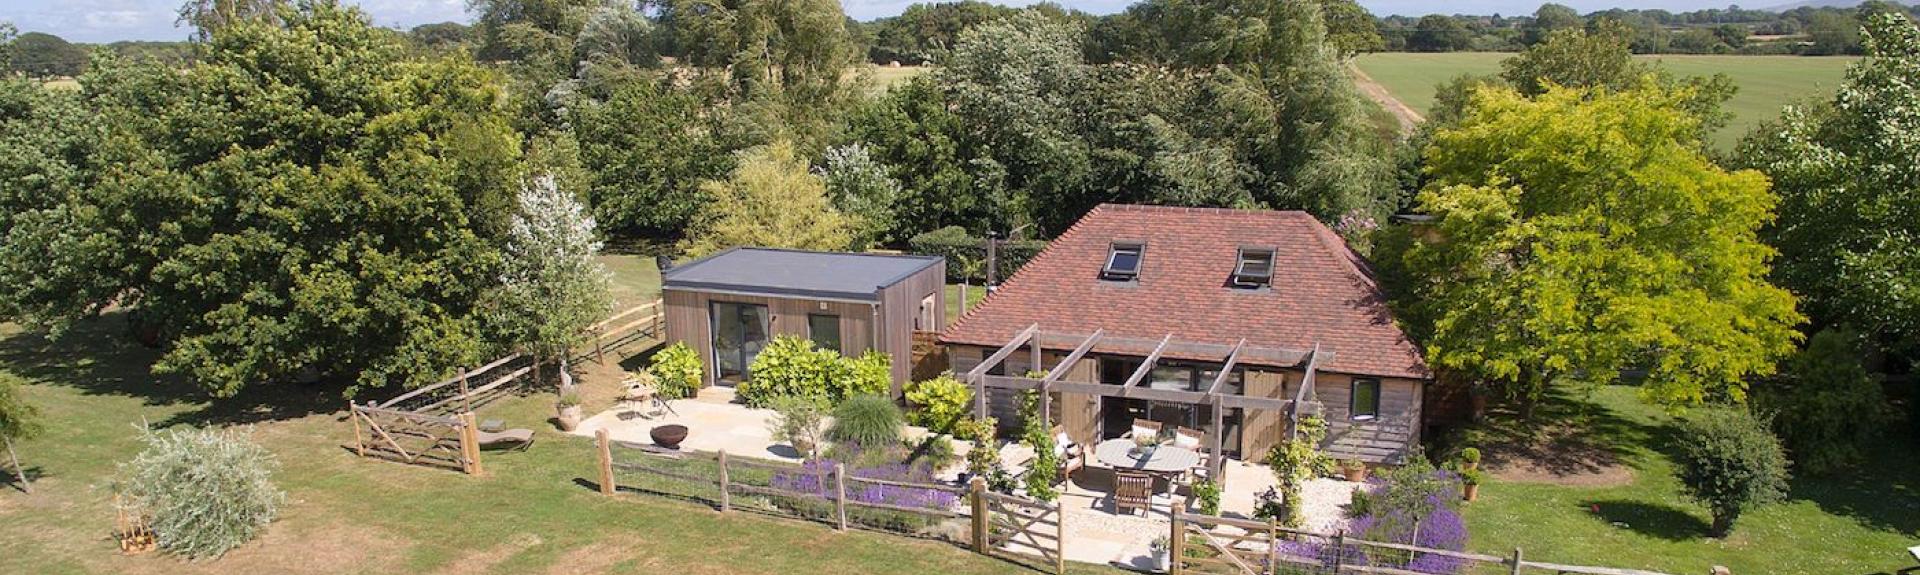 A 2-storey barn conversion with  terracotta tiles nestles against a cluster of small trees overlooking a large garden and fields in East Sussex.